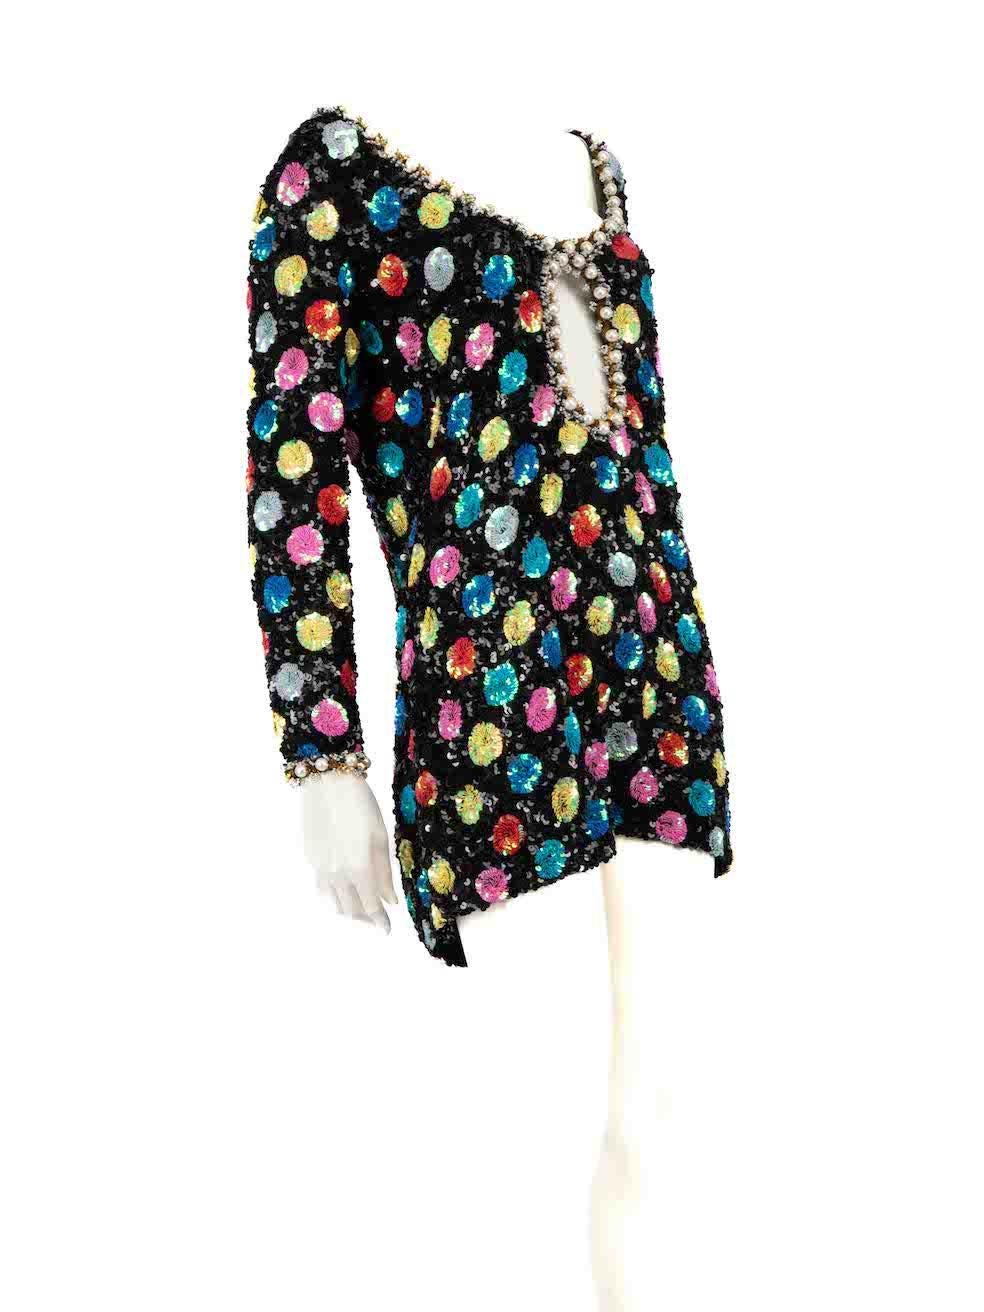 CONDITION is Very good. Minimal wear to dress is evident. Minimal missing sequin to the rear of this used Ashish designer resale item.
 
 
 
 Details
 
 
 Multicolour- black tone with polkadots
 
 Viscose
 
 Sequinned dress
 
 Polkadot pattern
 
